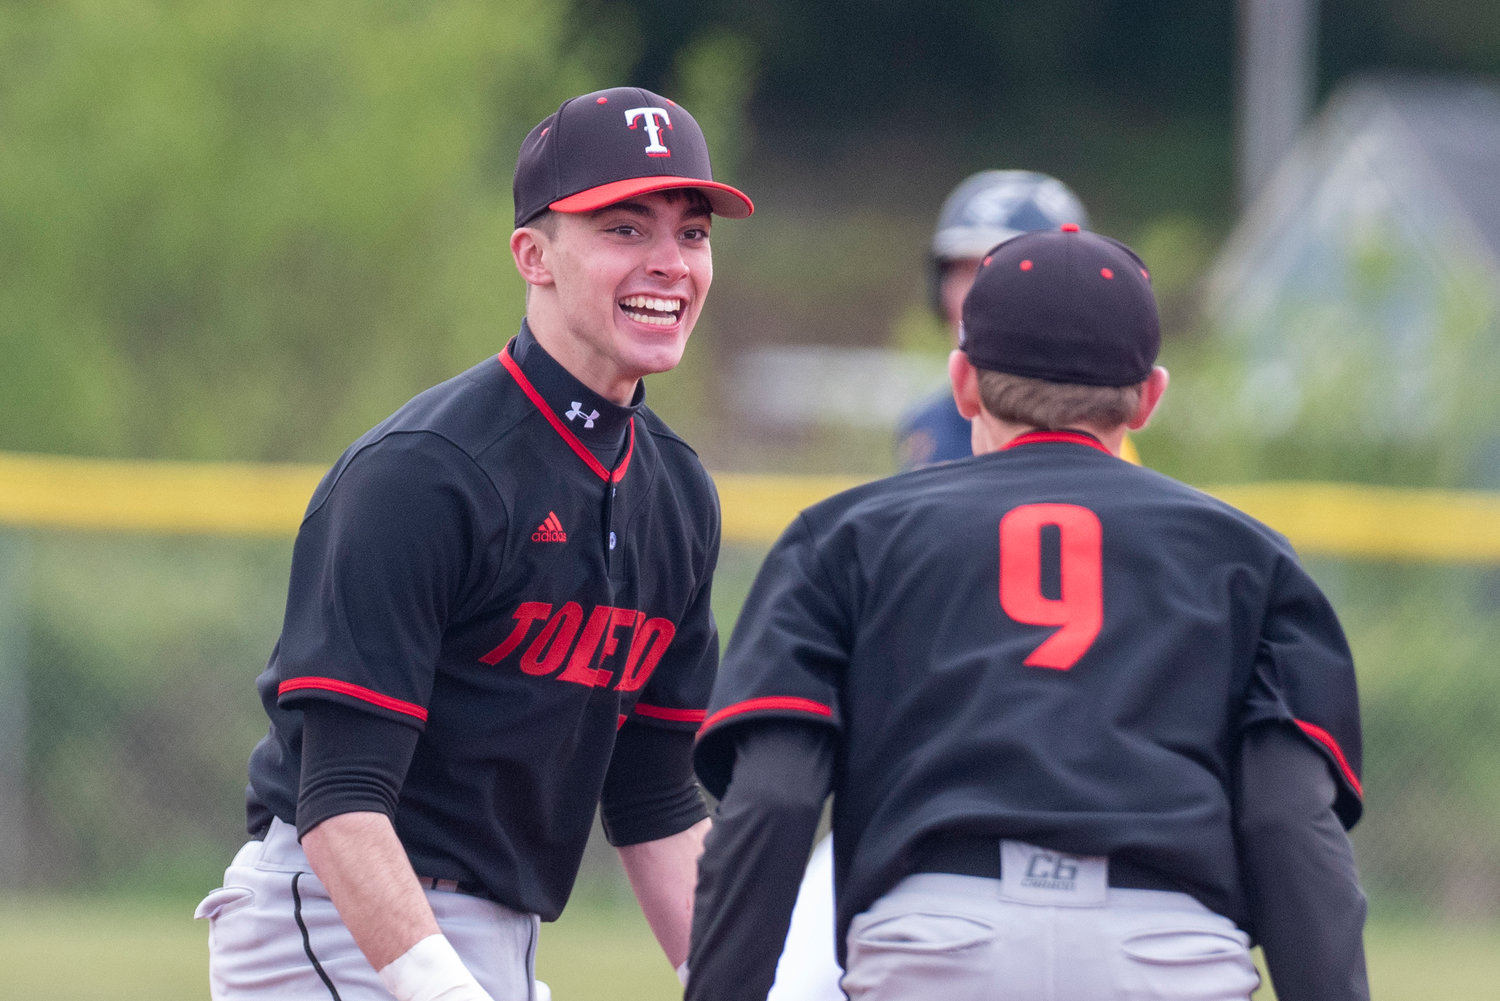 Toledo's Carson Gould, left, and Rogan Stanley (9) celebrate after defeating Ilwaco in a district playoff game on May 7.